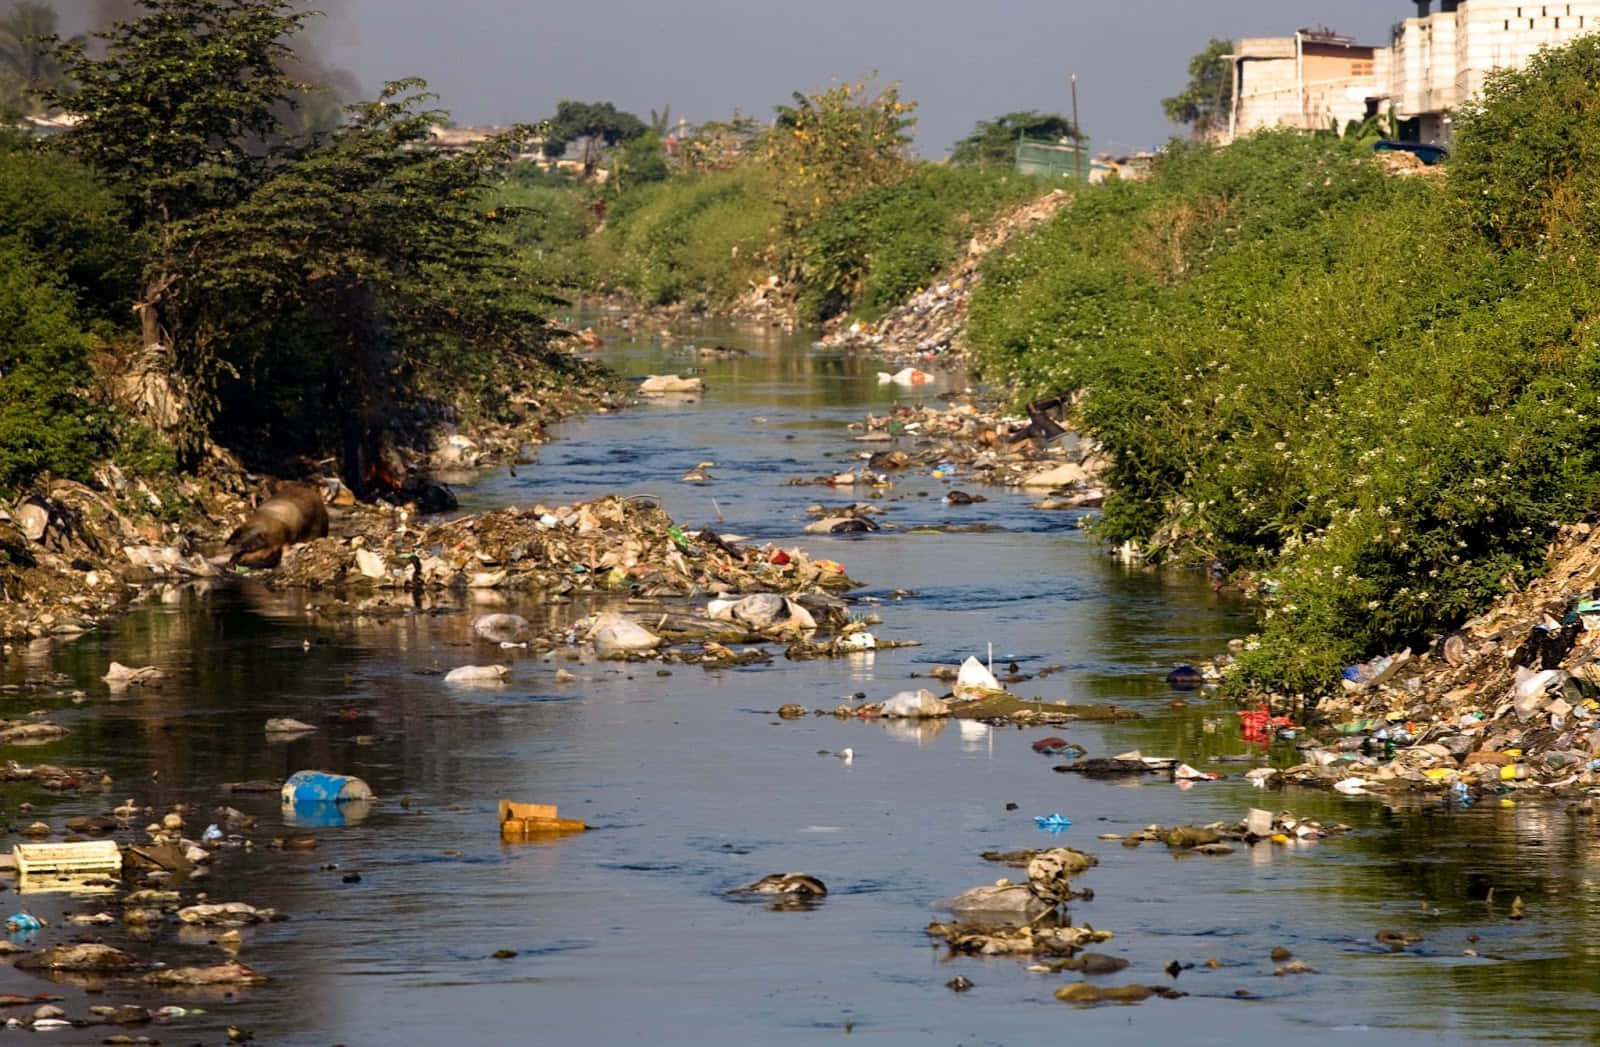 A River With Garbage And Trash In It